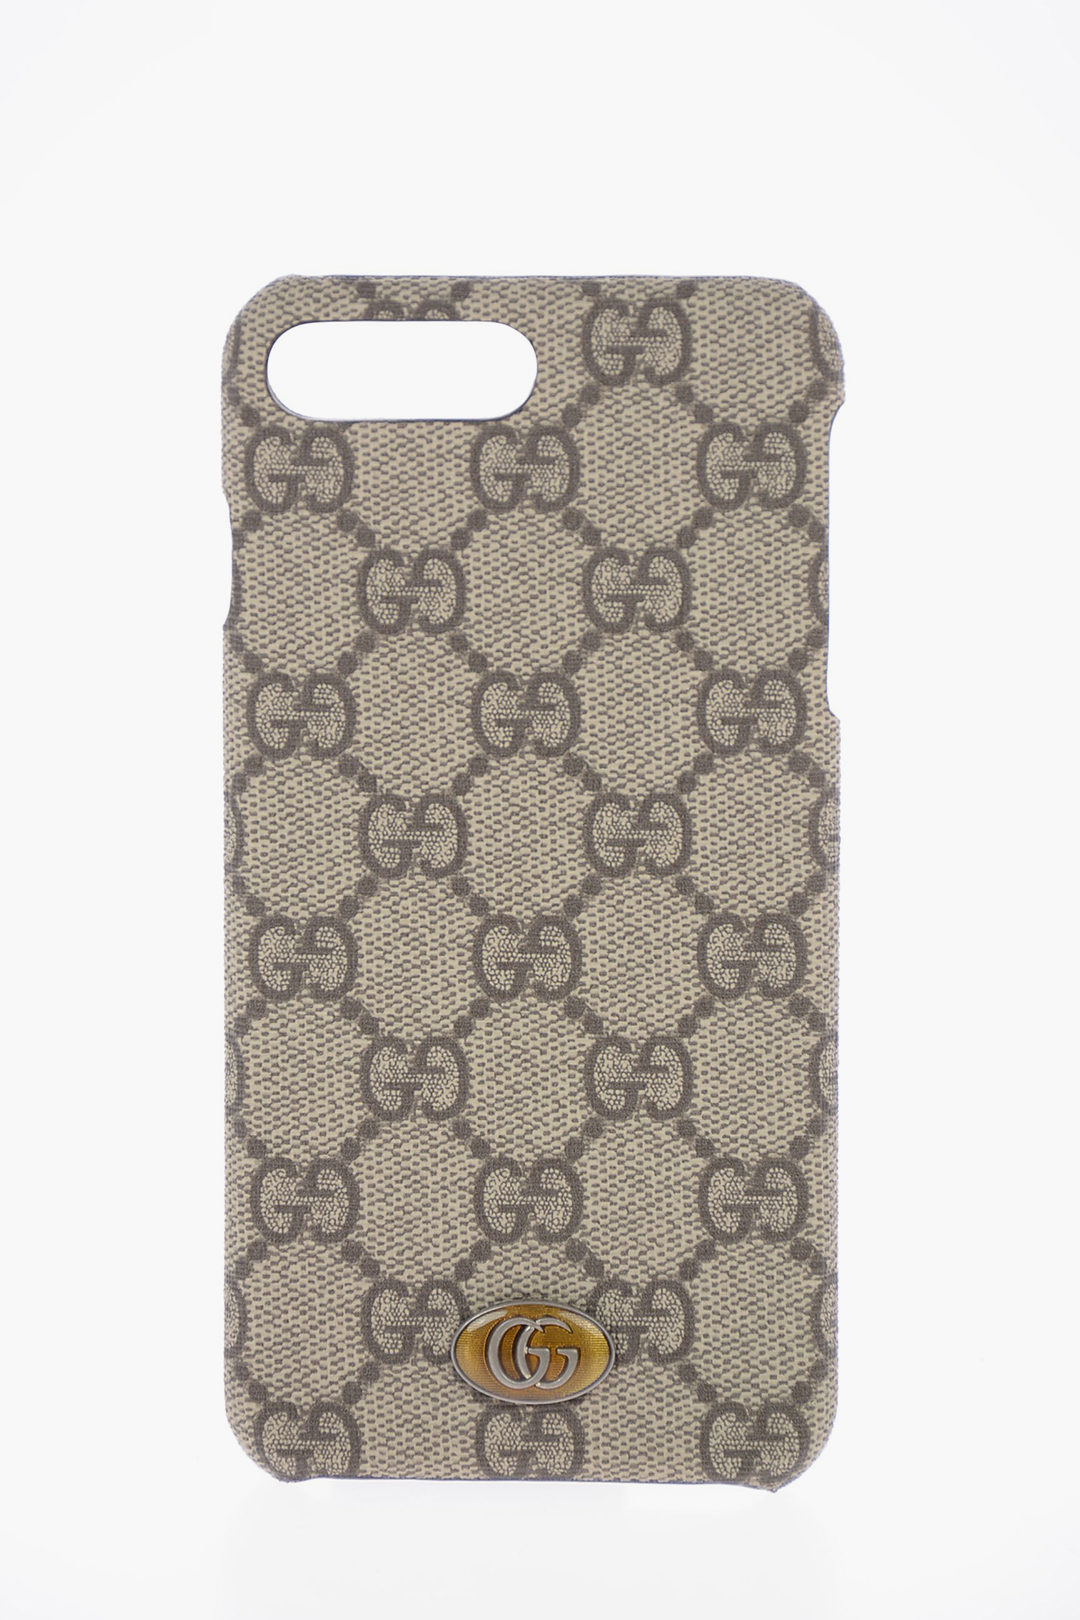 GUCCI LOGO ICON PATTERN iPhone 7 / 8 Plus Case Cover